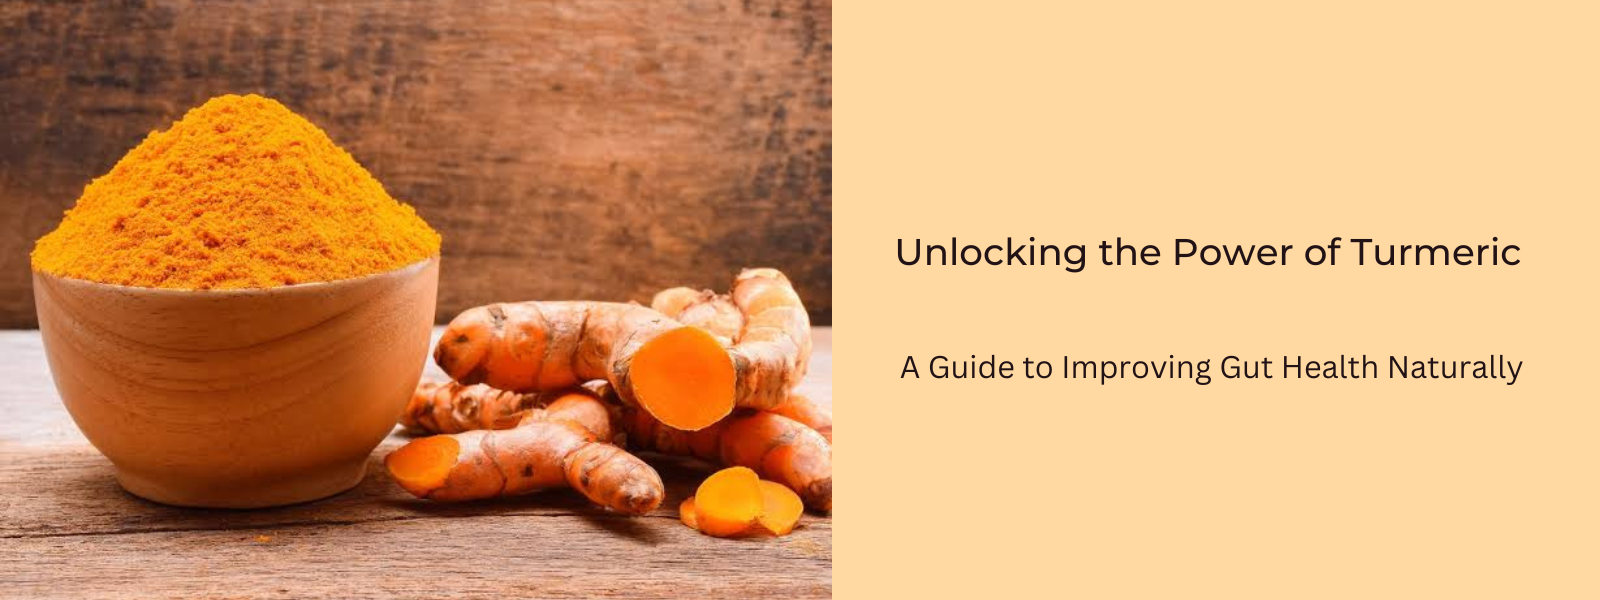 Unlocking the Power of Turmeric: A Guide to Improving Gut Health Naturally